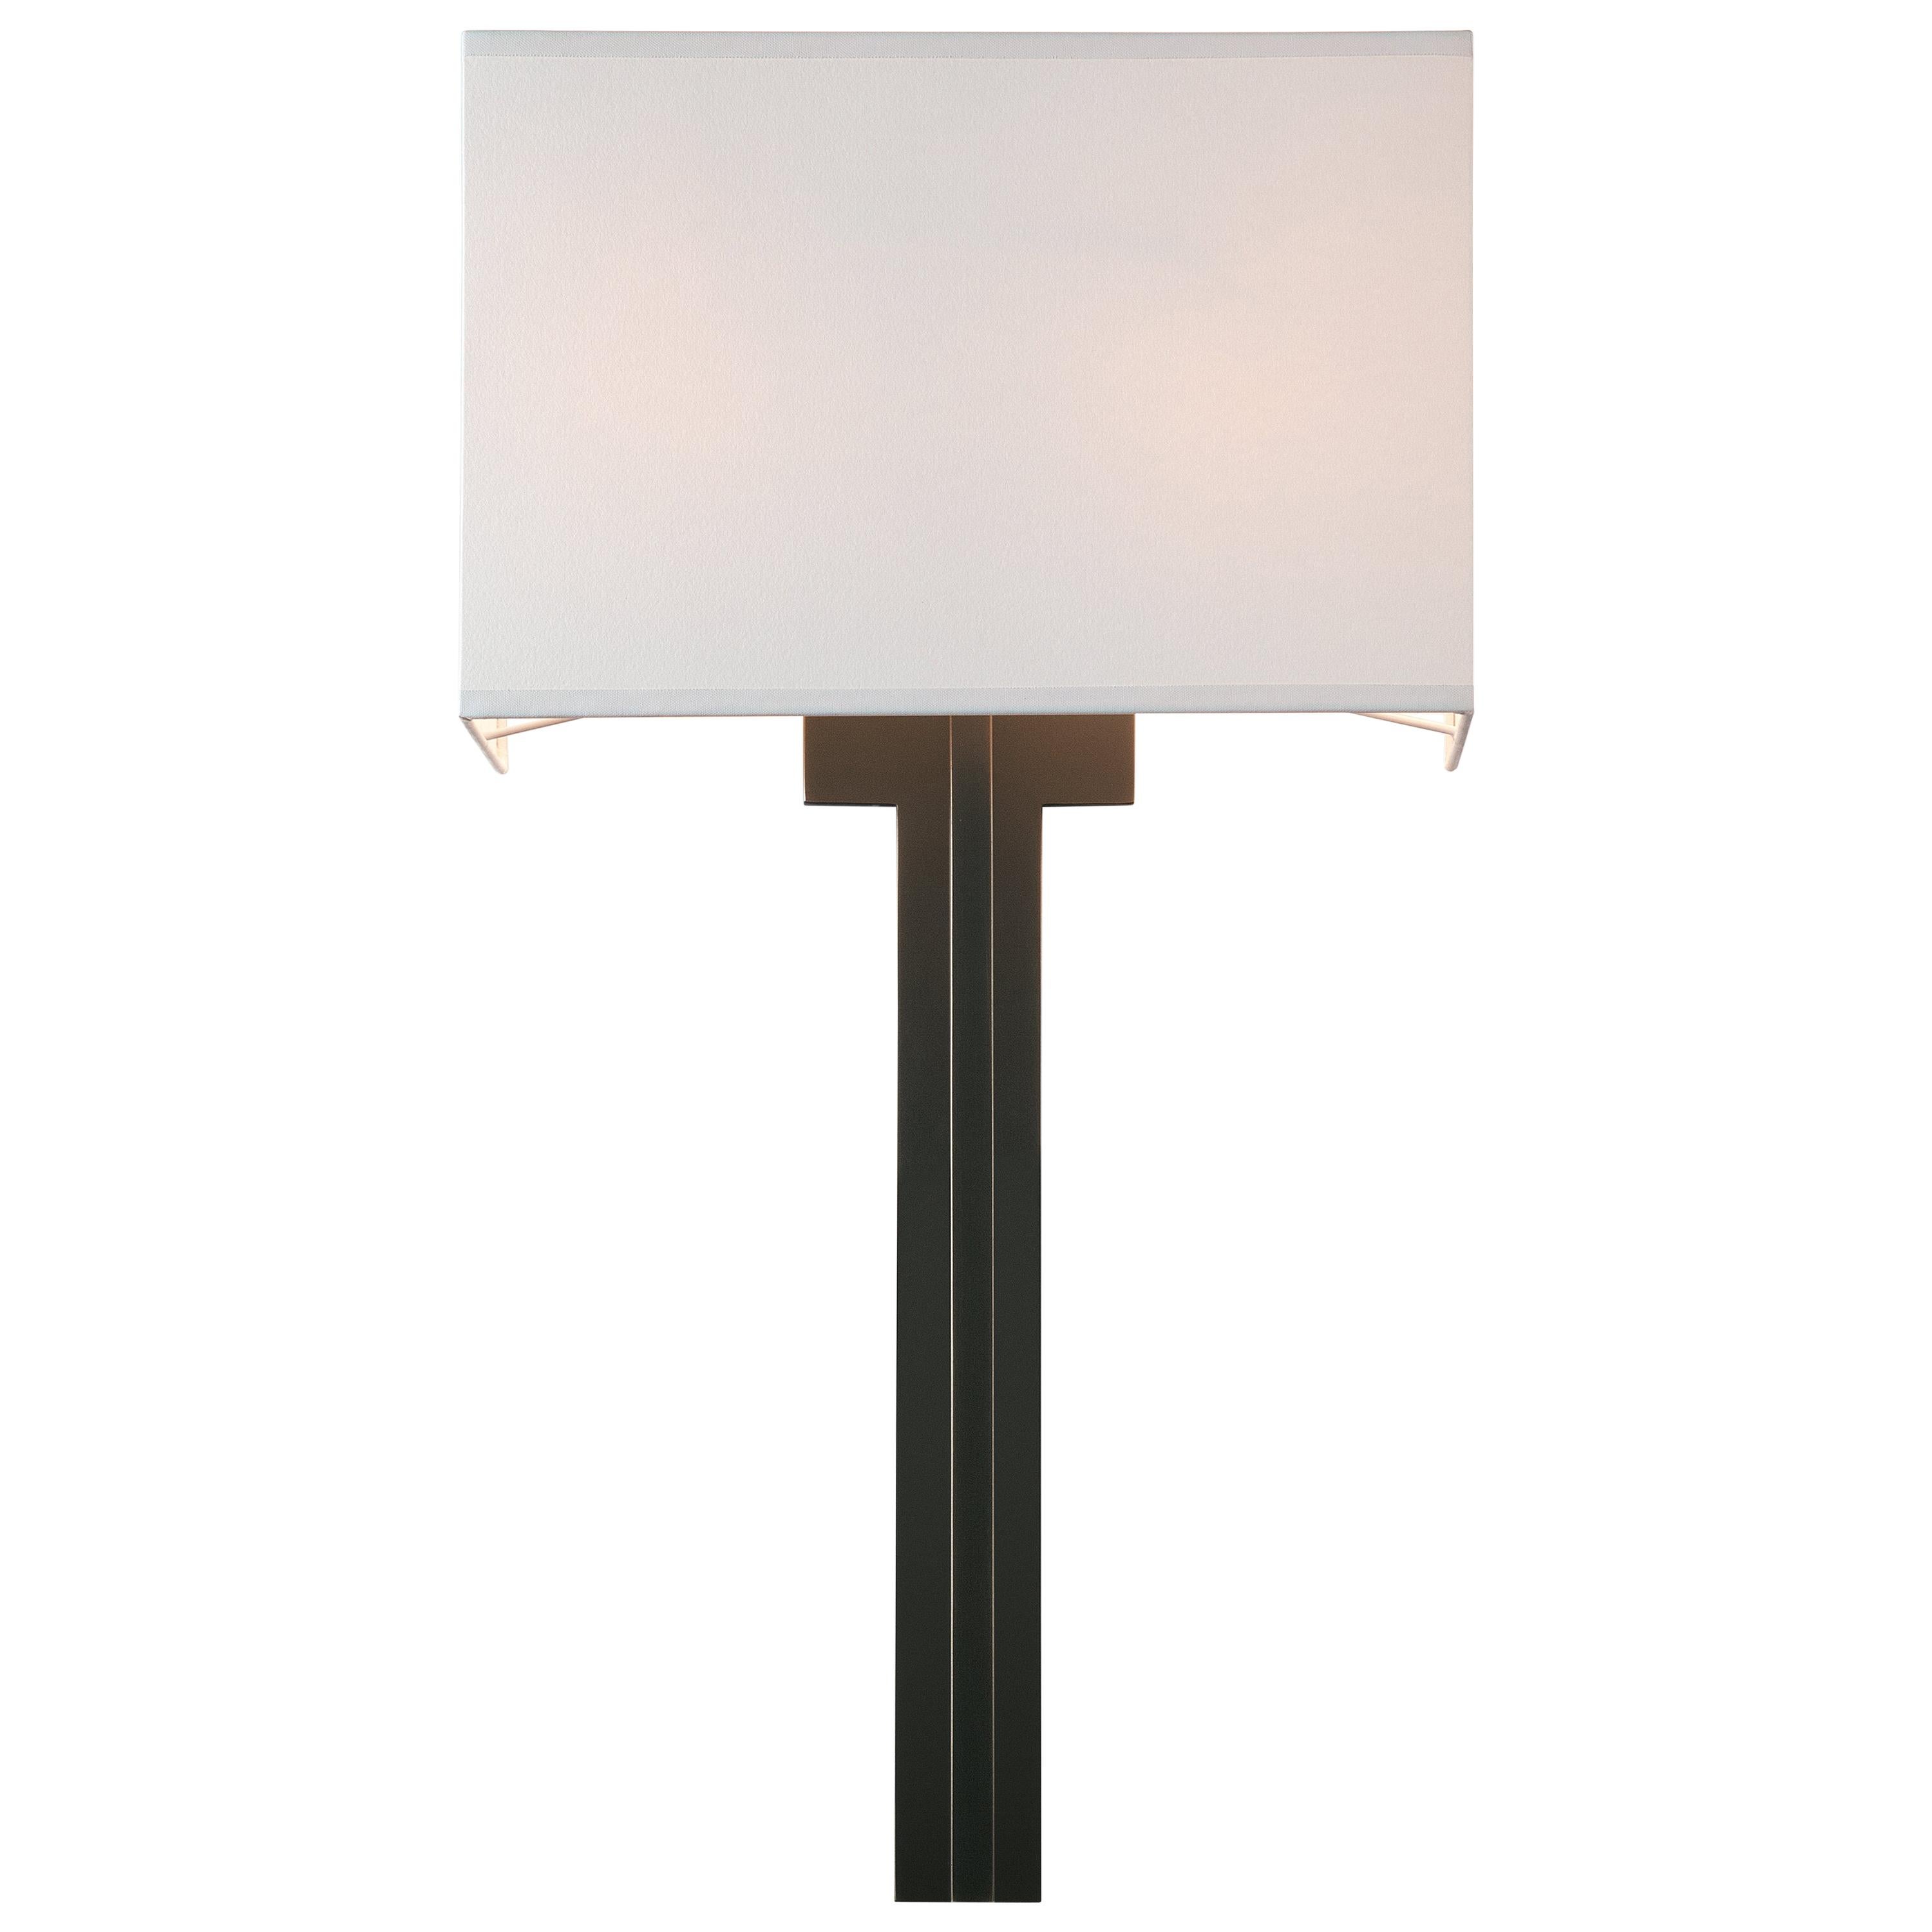 HOLLY HUNT Blade Small Wall Sconce in Metal Frame and Aquarelle Shade